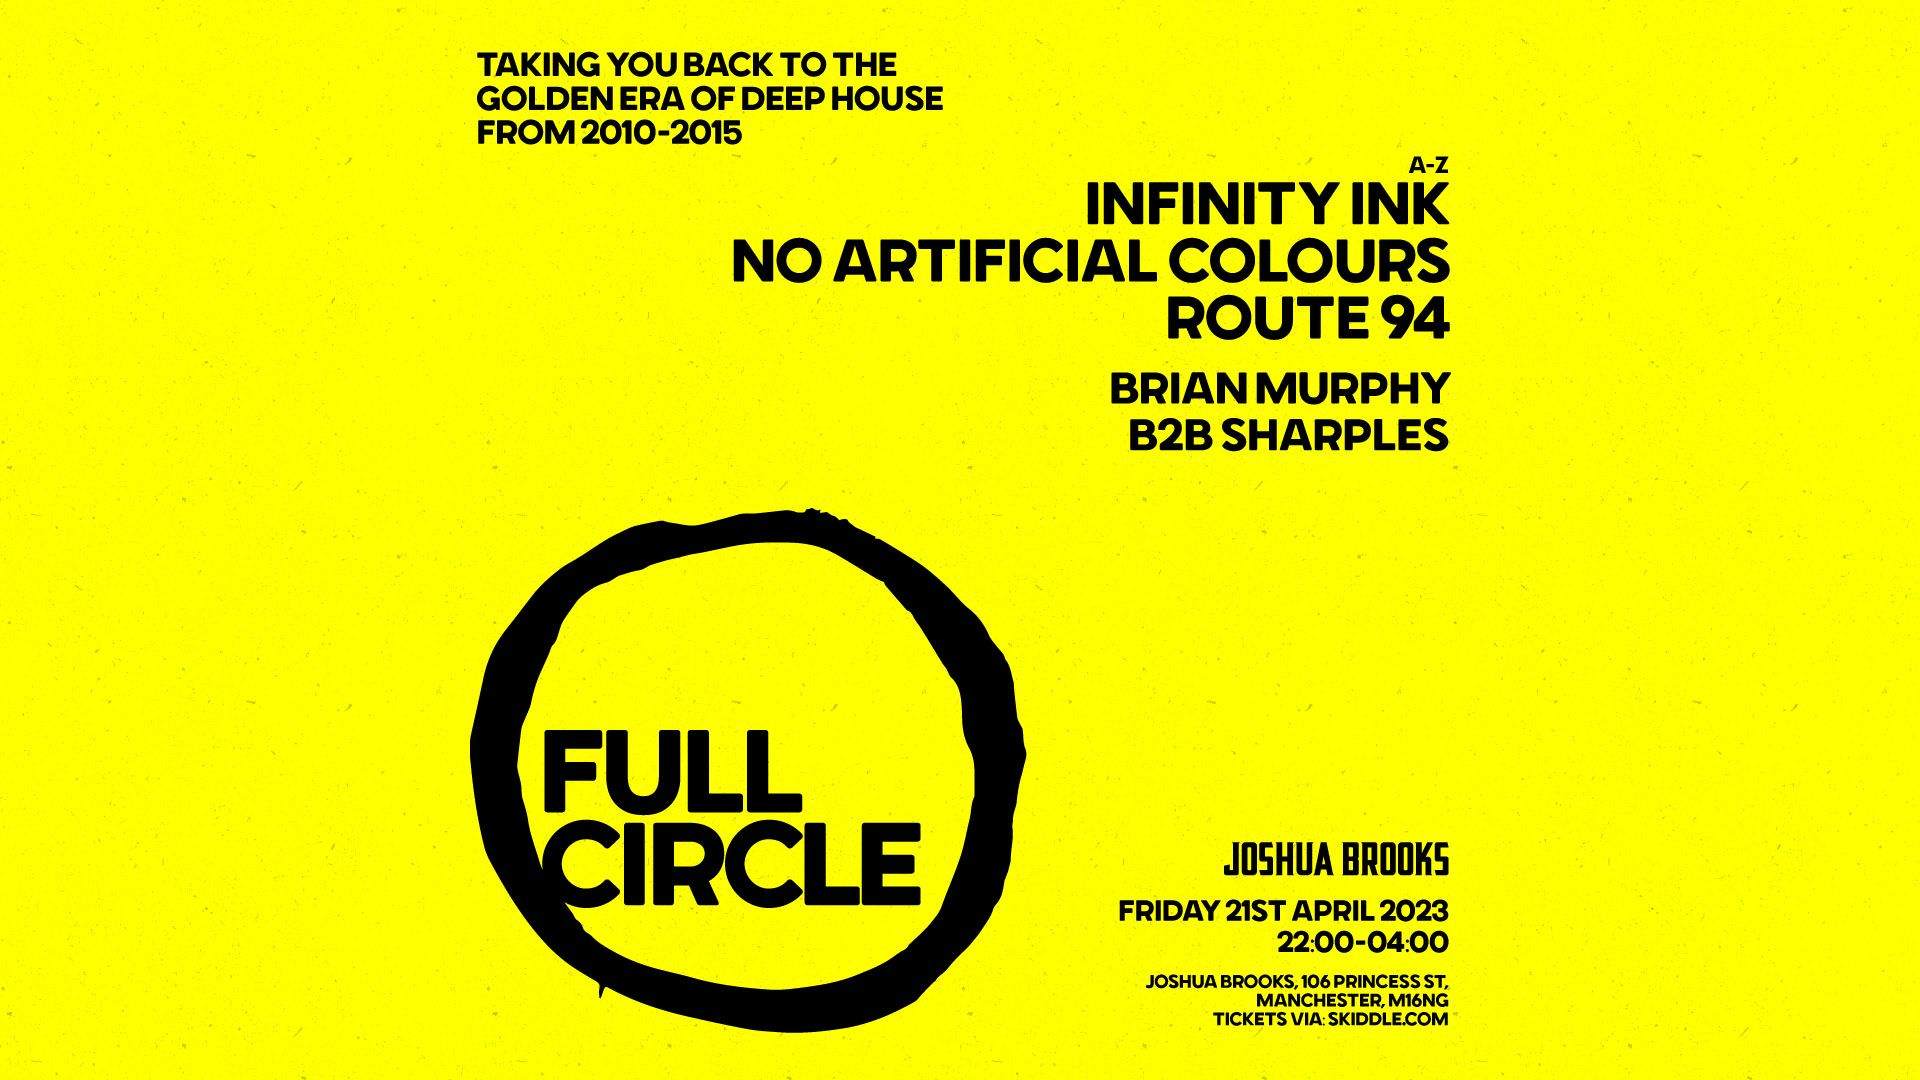 Full Circle with Route 94, Infinity Ink, No Artificial Colours - Página frontal